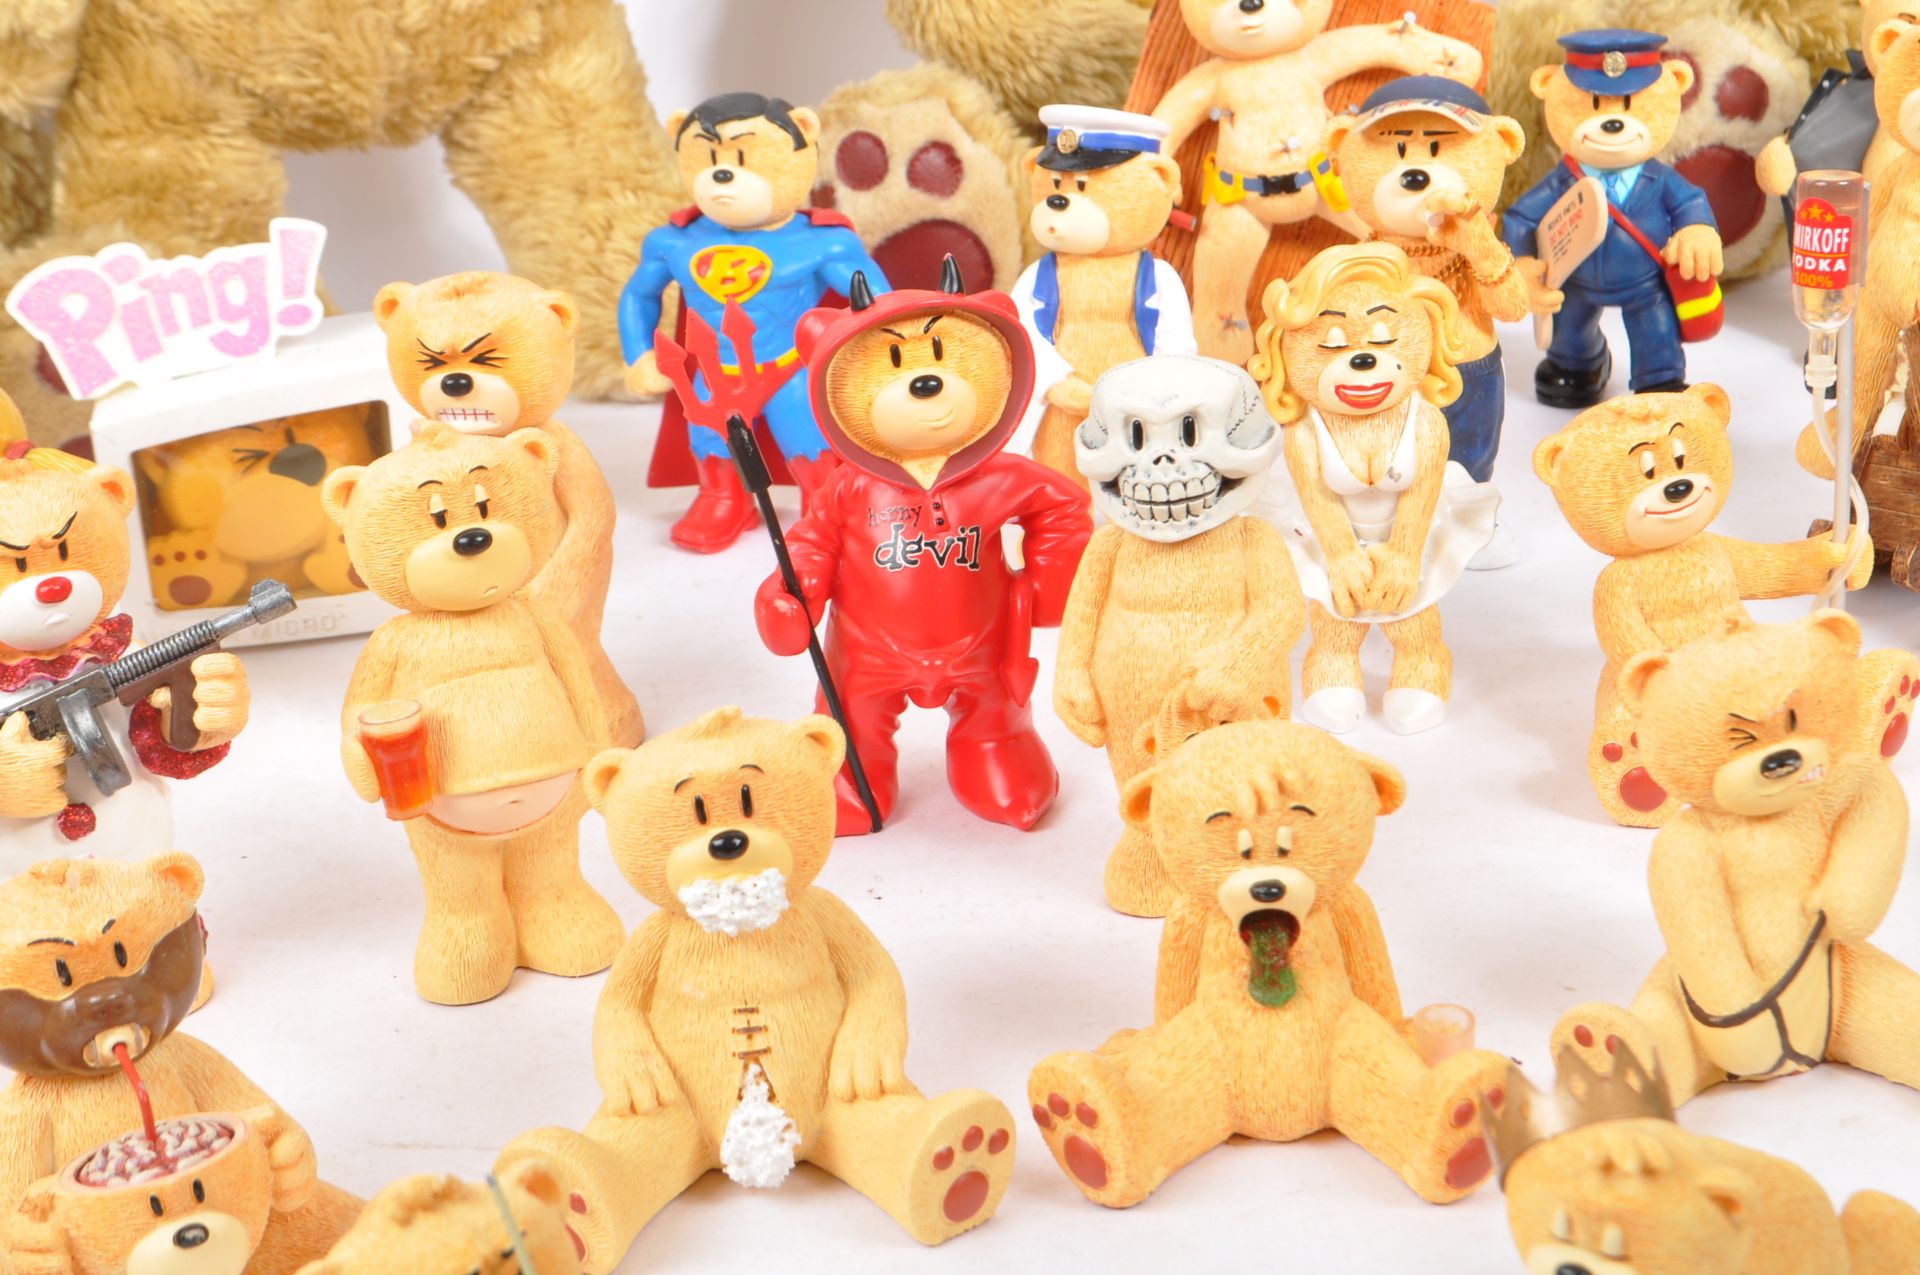 LARGE COLLECTION OF BAD TASTE BEARS FIGURINES - Image 6 of 12